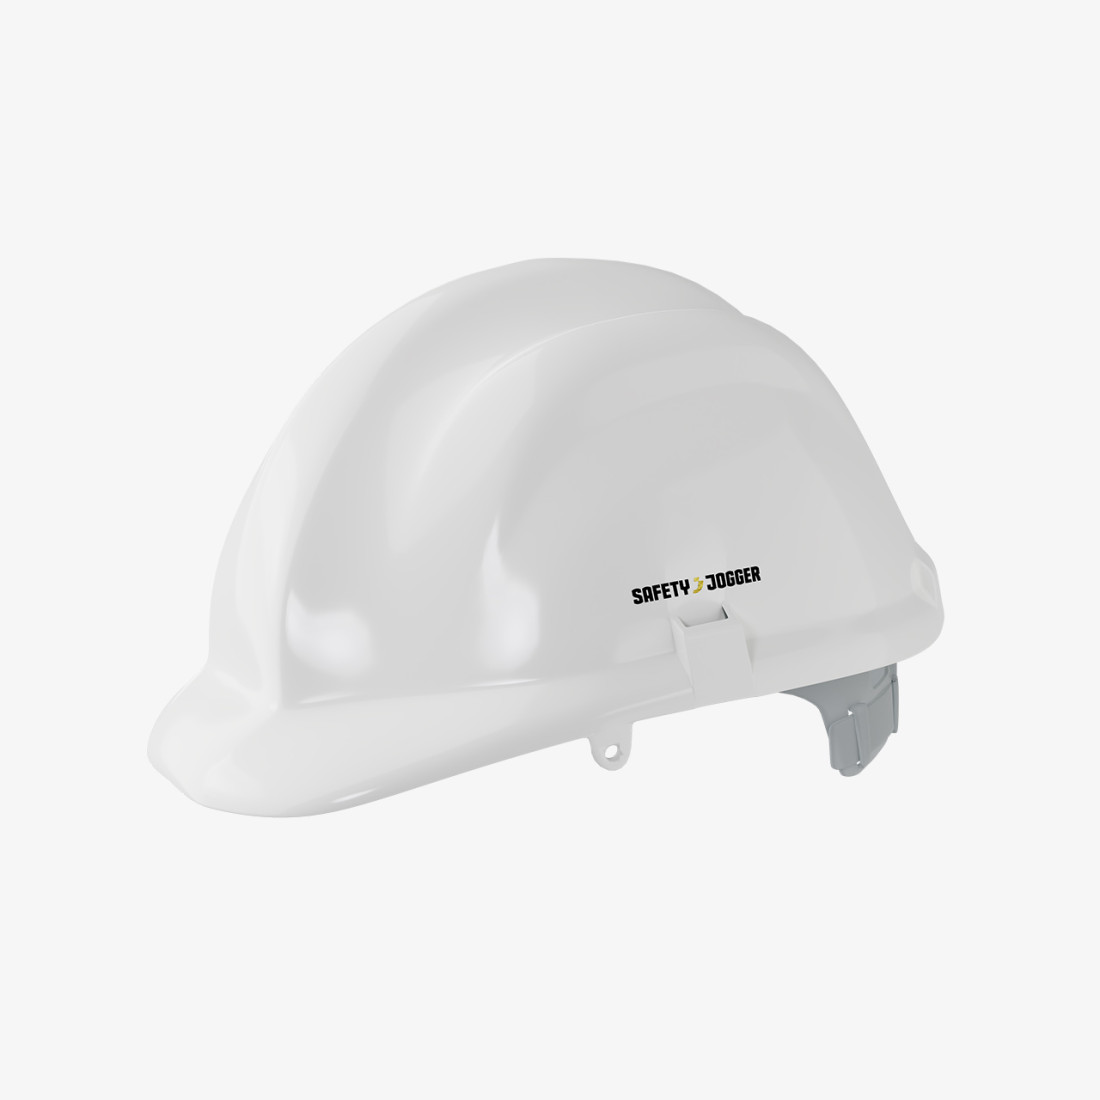 KANHAS Safety Helmet - Personal protection